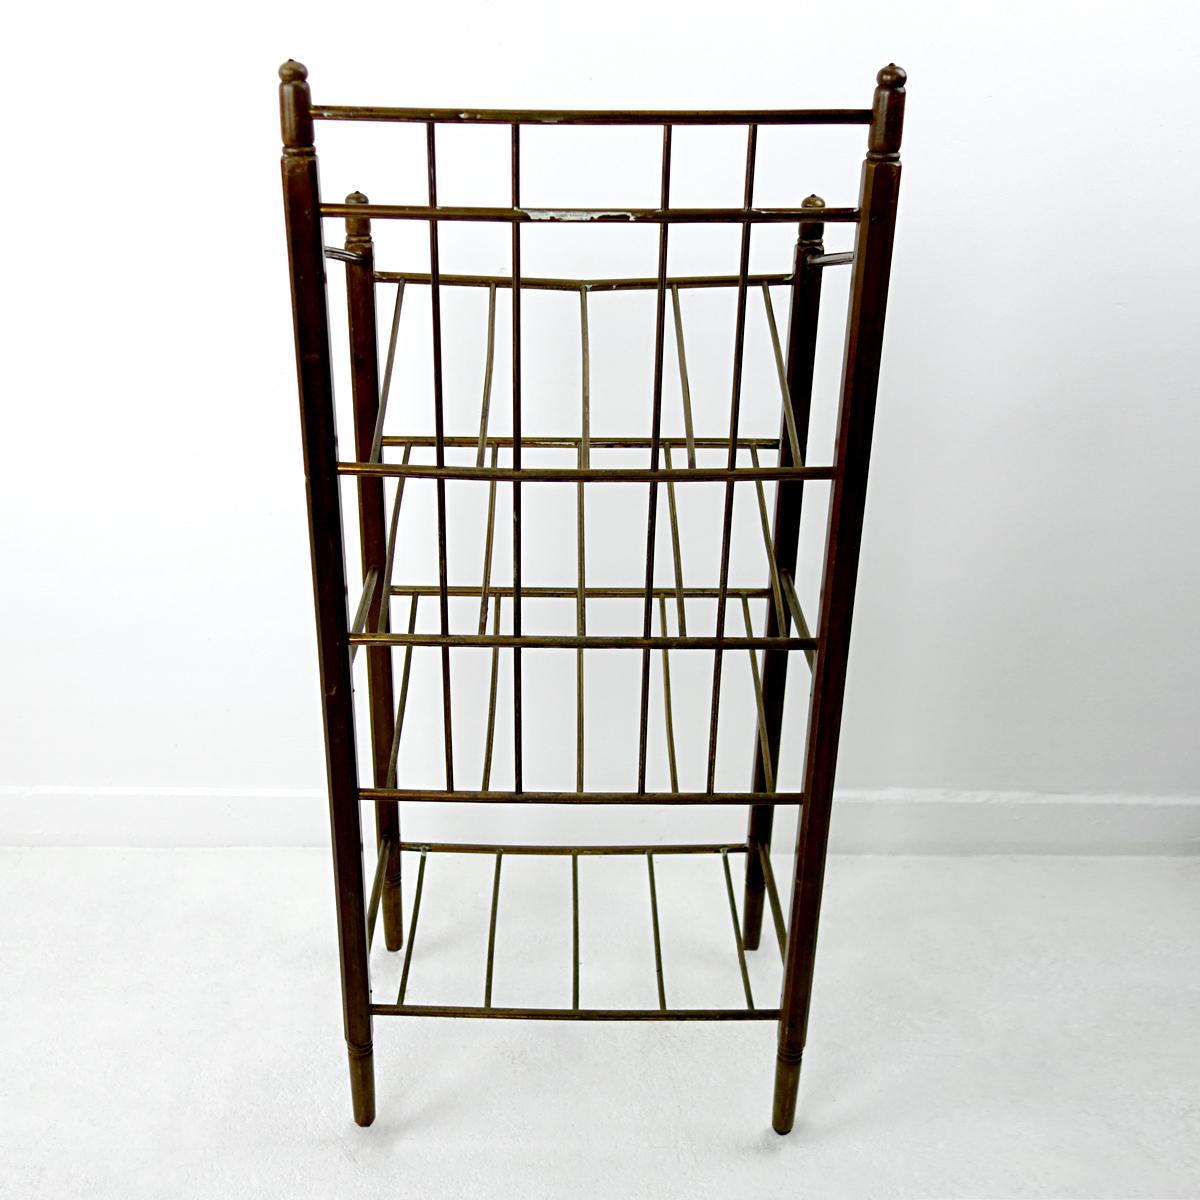 20th Century Art Deco Wood and Brass Magazine Stand by Ernst Rockhausen & Söhne For Sale